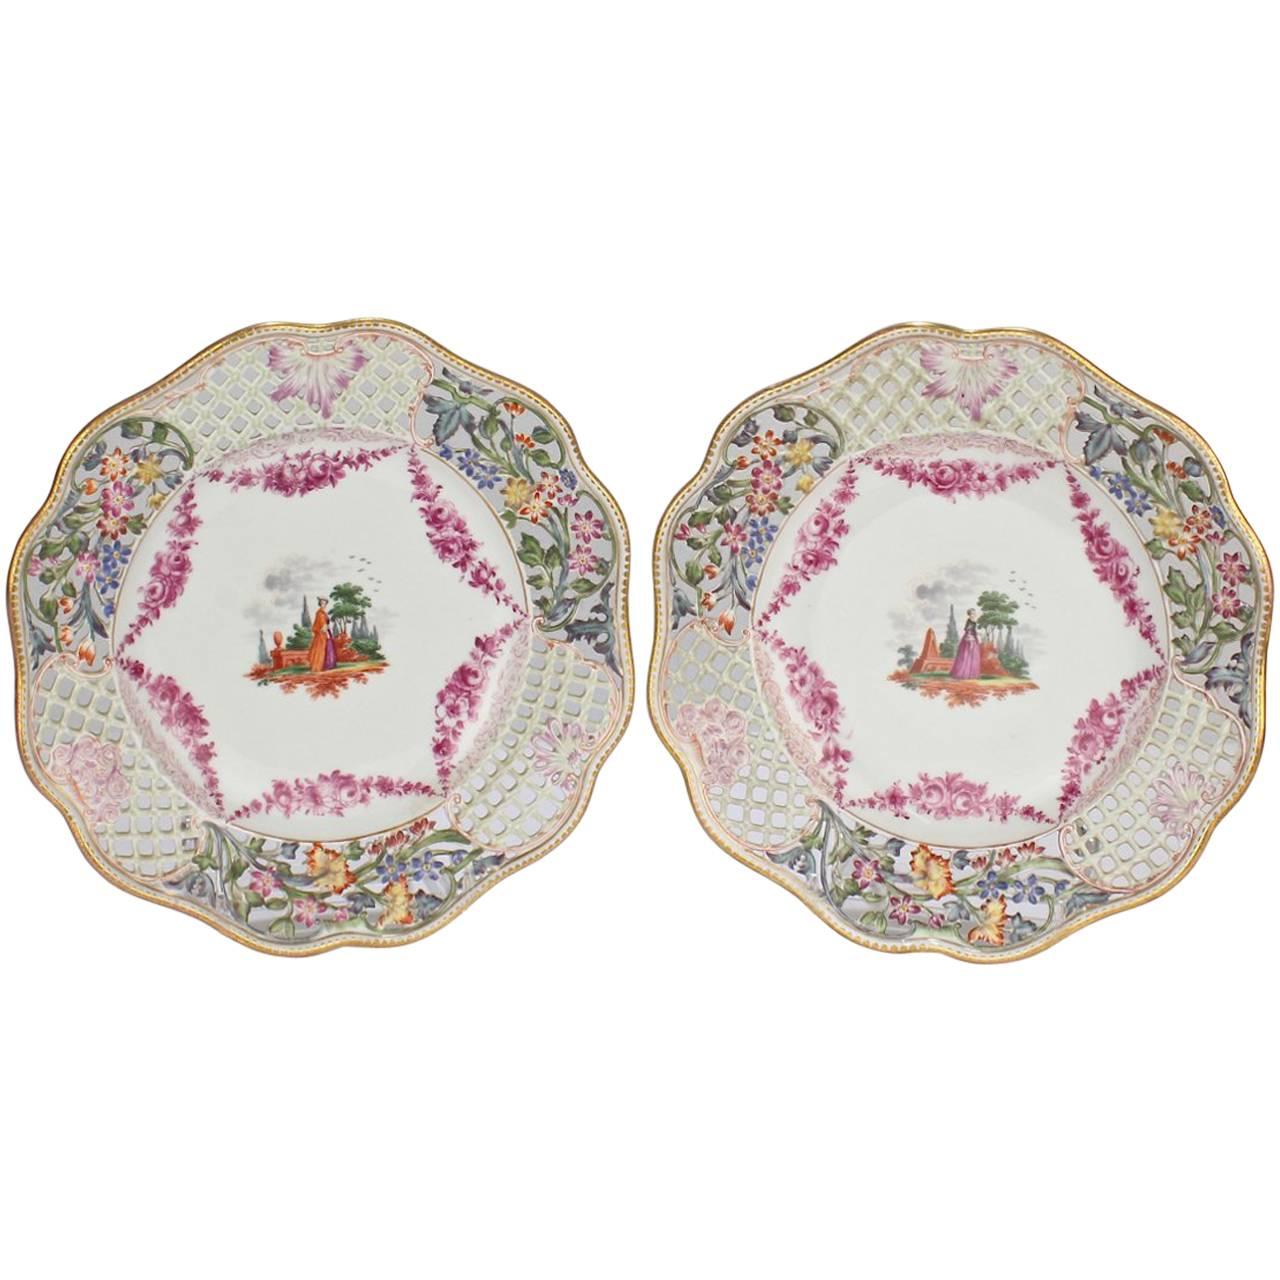 Two Antique Dresden Hand-Painted Reticulated Cabinet Plates